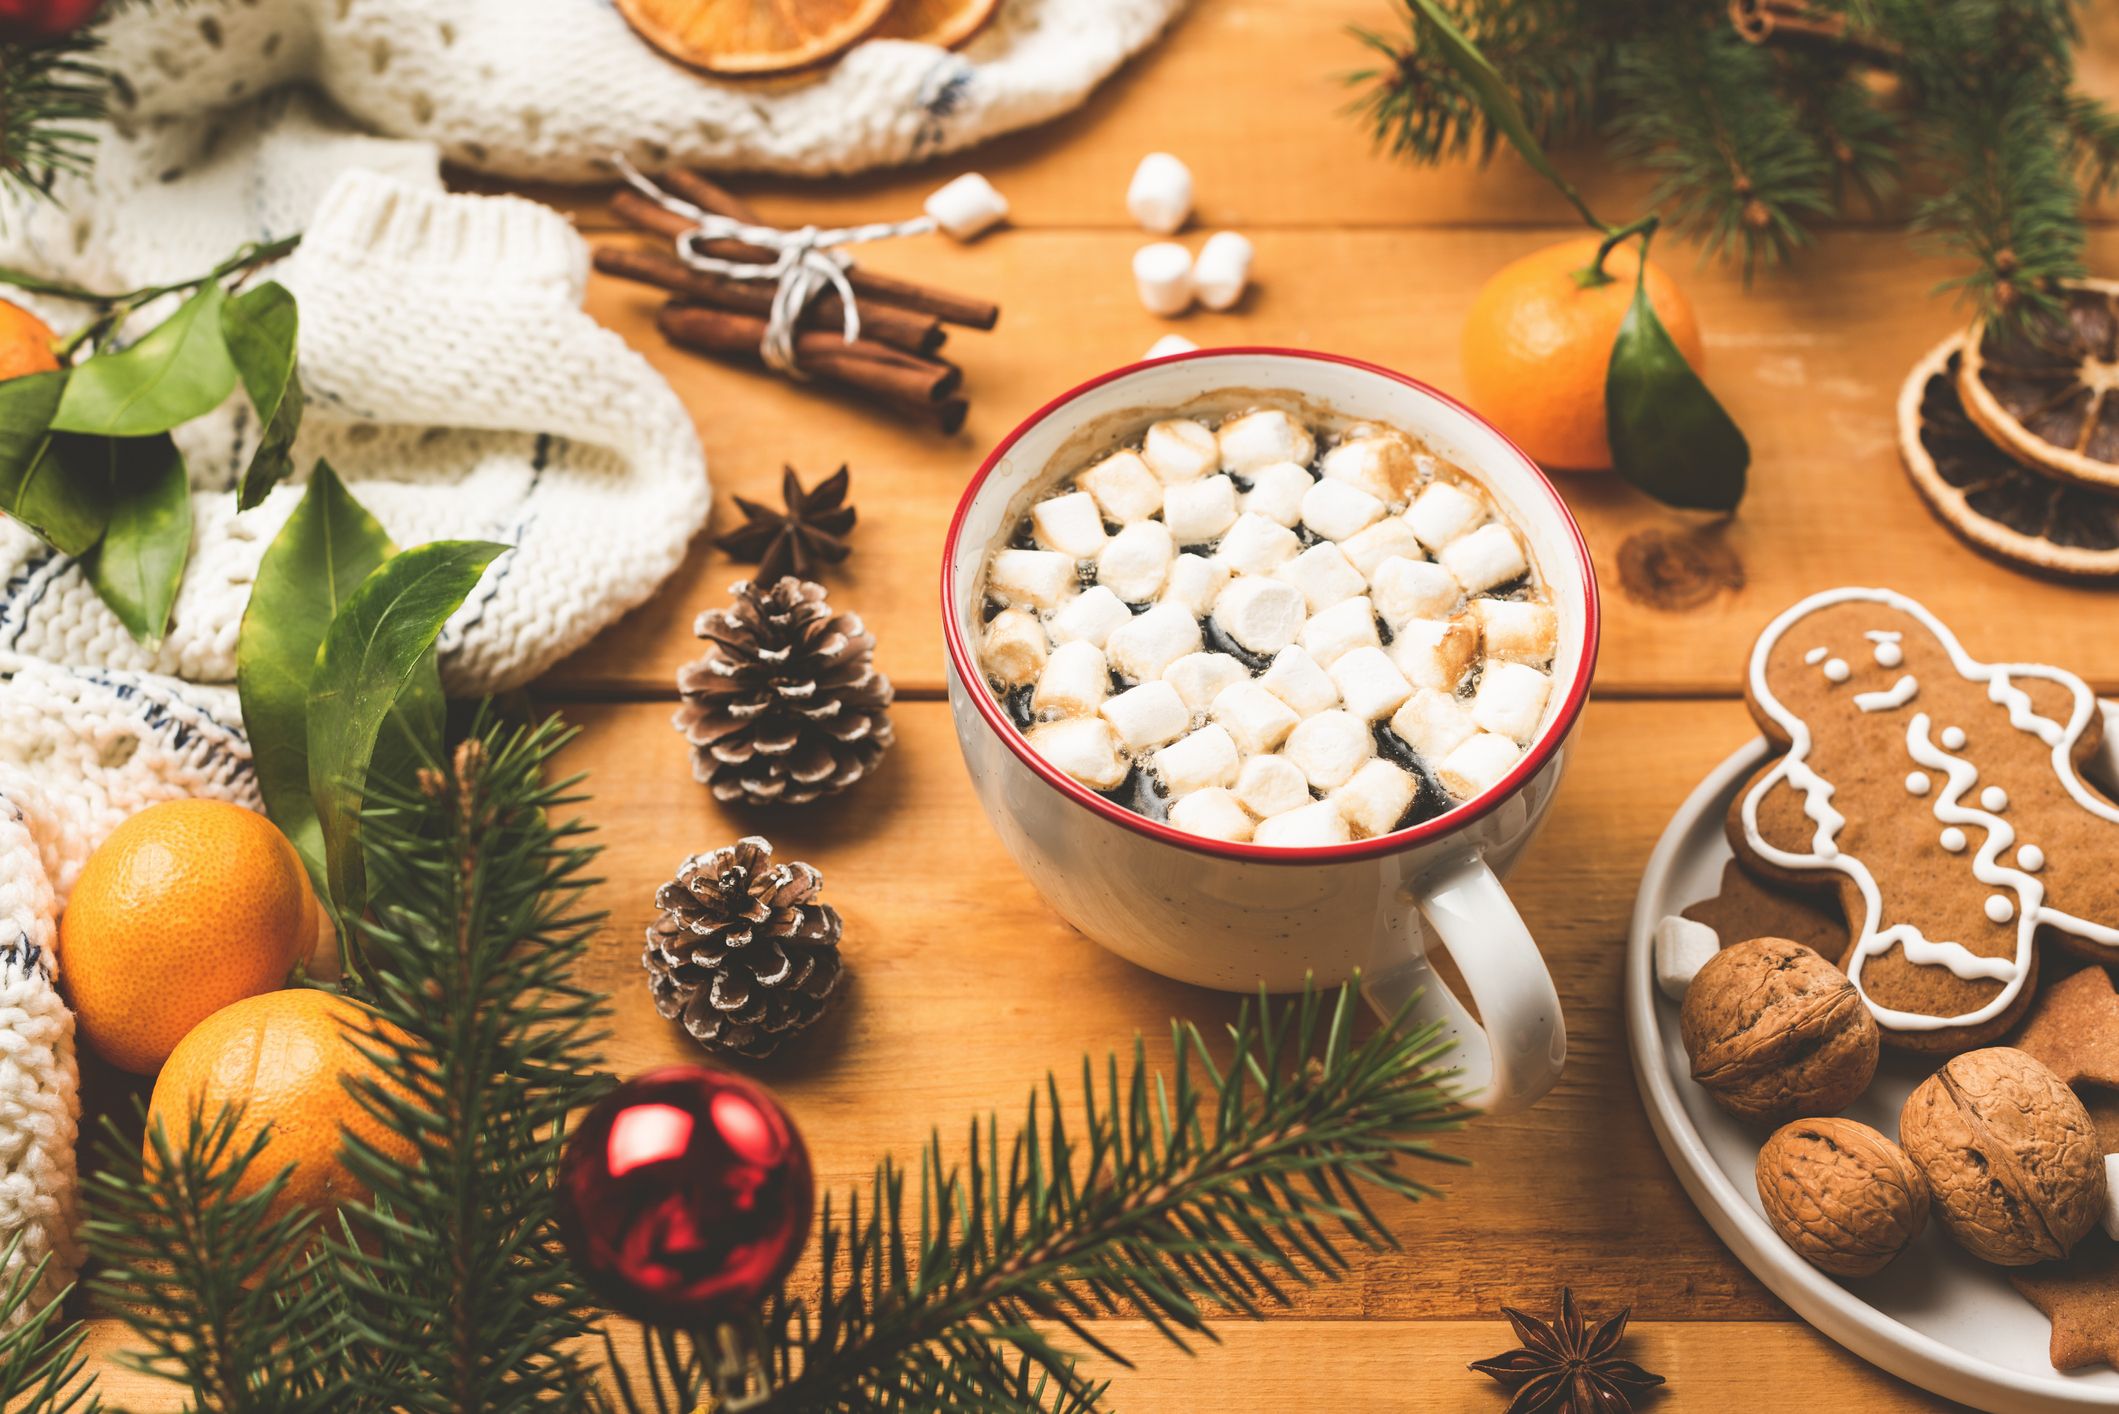 36 Best Christmas Traditions to Adopt With Your Family 2021